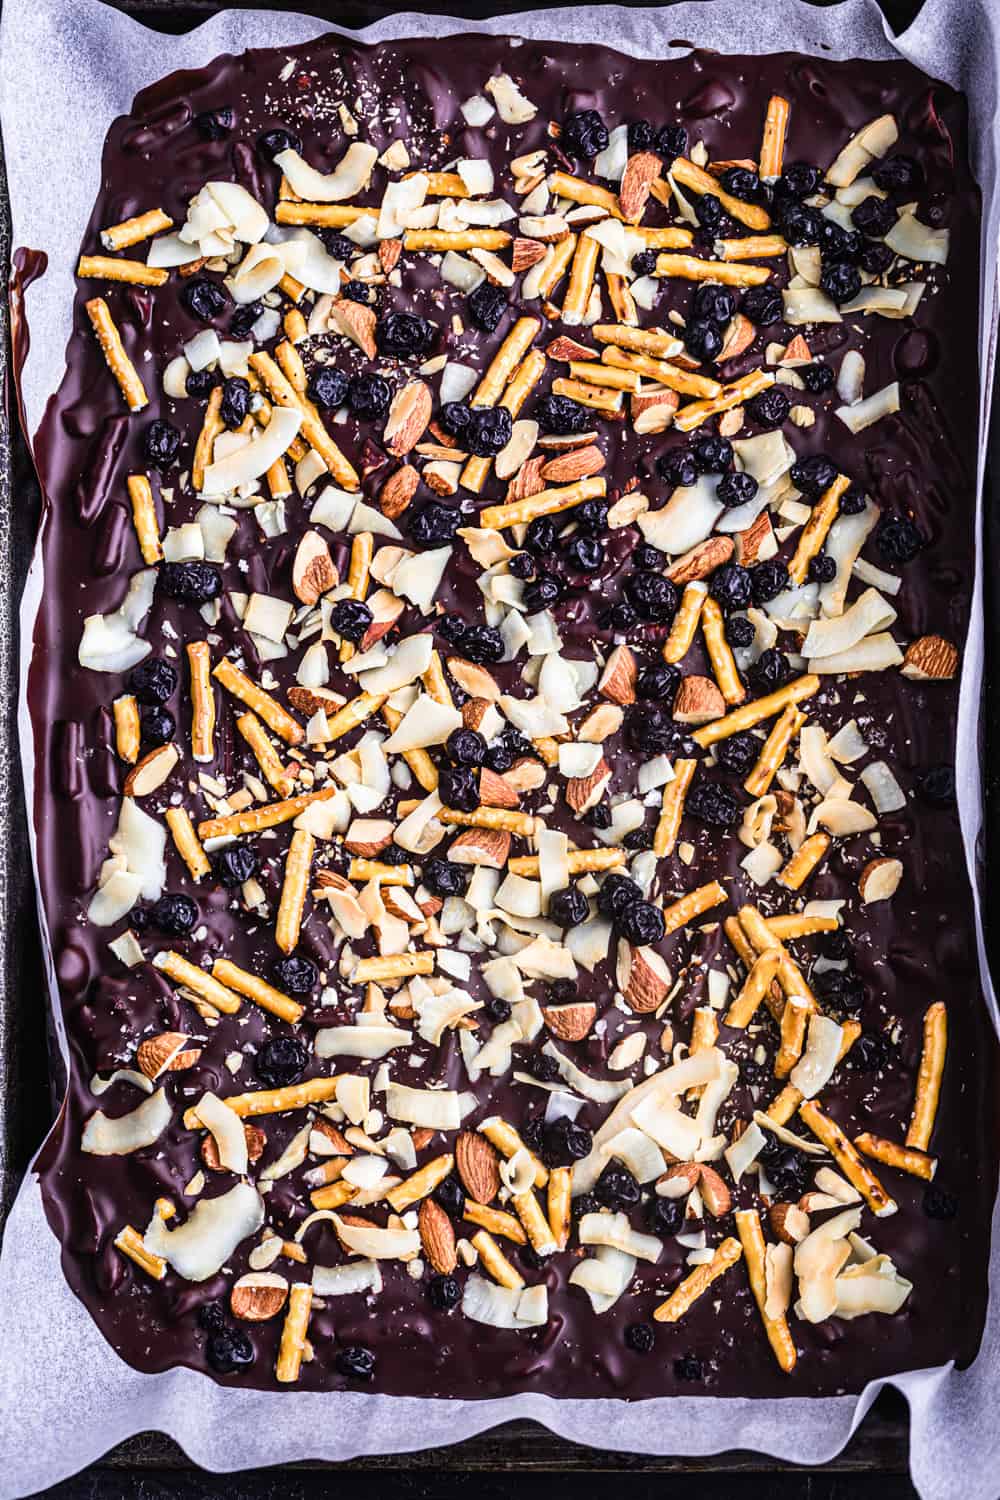 Chocolate bark with shredded coconut, pretzels, almonds and dried blueberries.